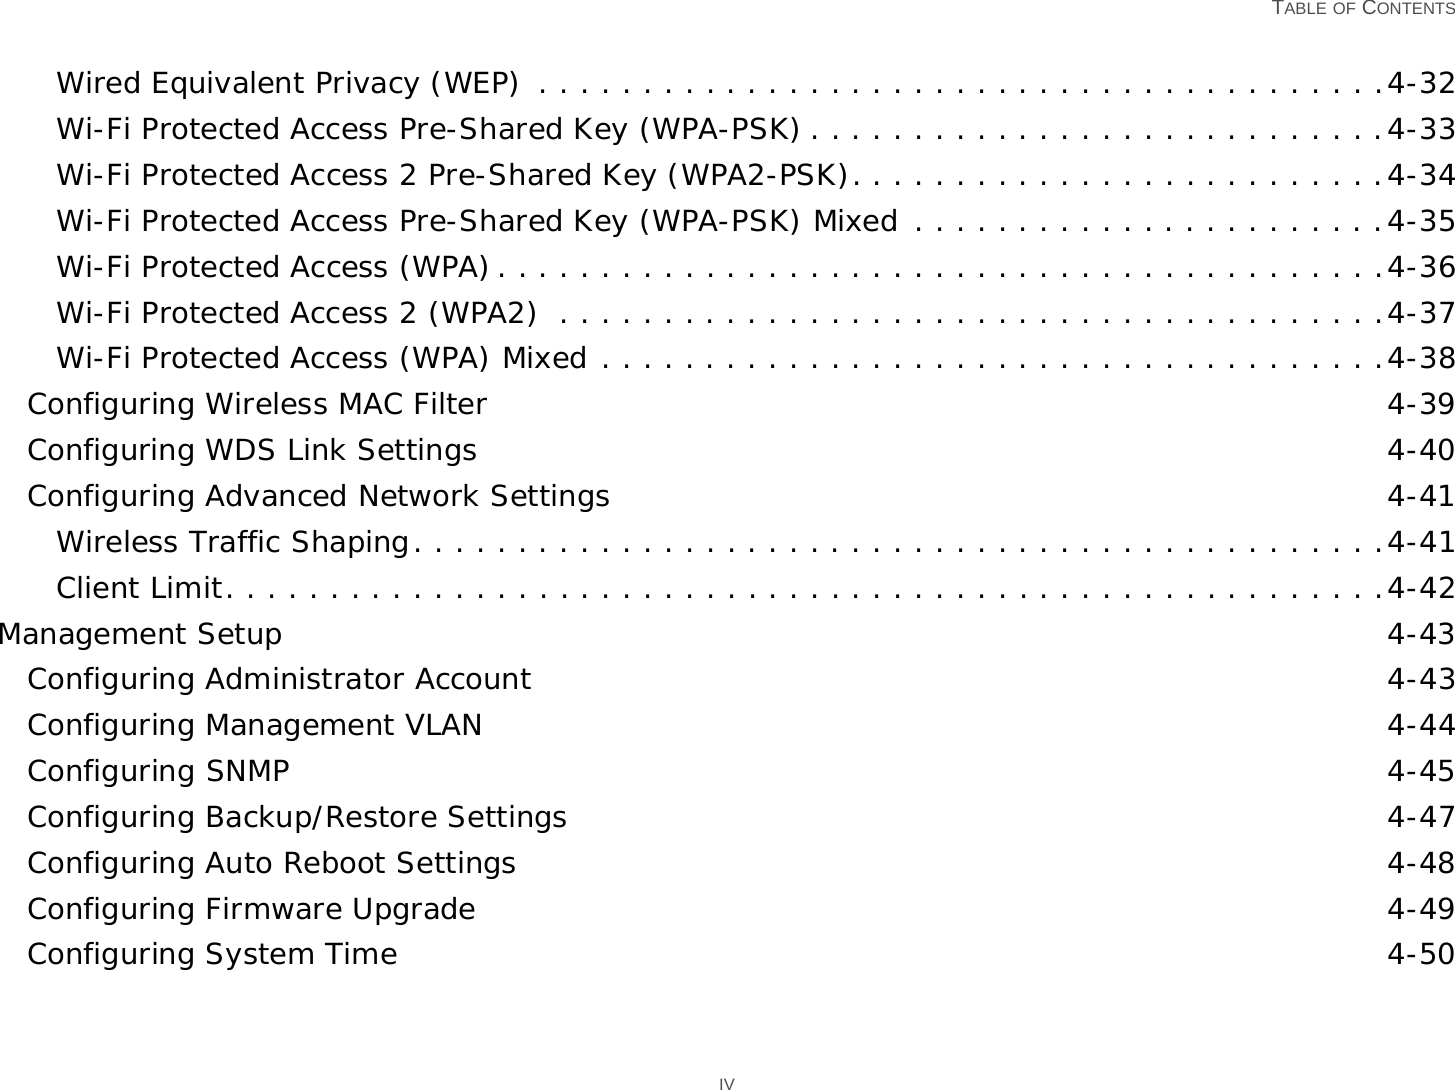   TABLE OF CONTENTS IVWired Equivalent Privacy (WEP)  . . . . . . . . . . . . . . . . . . . . . . . . . . . . . . . . . . . . . . . . .4-32Wi-Fi Protected Access Pre-Shared Key (WPA-PSK) . . . . . . . . . . . . . . . . . . . . . . . . . . . .4-33Wi-Fi Protected Access 2 Pre-Shared Key (WPA2-PSK). . . . . . . . . . . . . . . . . . . . . . . . . .4-34Wi-Fi Protected Access Pre-Shared Key (WPA-PSK) Mixed . . . . . . . . . . . . . . . . . . . . . . .4-35Wi-Fi Protected Access (WPA). . . . . . . . . . . . . . . . . . . . . . . . . . . . . . . . . . . . . . . . . . .4-36Wi-Fi Protected Access 2 (WPA2)  . . . . . . . . . . . . . . . . . . . . . . . . . . . . . . . . . . . . . . . .4-37Wi-Fi Protected Access (WPA) Mixed . . . . . . . . . . . . . . . . . . . . . . . . . . . . . . . . . . . . . .4-38Configuring Wireless MAC Filter 4-39Configuring WDS Link Settings 4-40Configuring Advanced Network Settings 4-41Wireless Traffic Shaping. . . . . . . . . . . . . . . . . . . . . . . . . . . . . . . . . . . . . . . . . . . . . . .4-41Client Limit. . . . . . . . . . . . . . . . . . . . . . . . . . . . . . . . . . . . . . . . . . . . . . . . . . . . . . . .4-42Management Setup 4-43Configuring Administrator Account 4-43Configuring Management VLAN 4-44Configuring SNMP 4-45Configuring Backup/Restore Settings 4-47Configuring Auto Reboot Settings 4-48Configuring Firmware Upgrade 4-49Configuring System Time 4-50